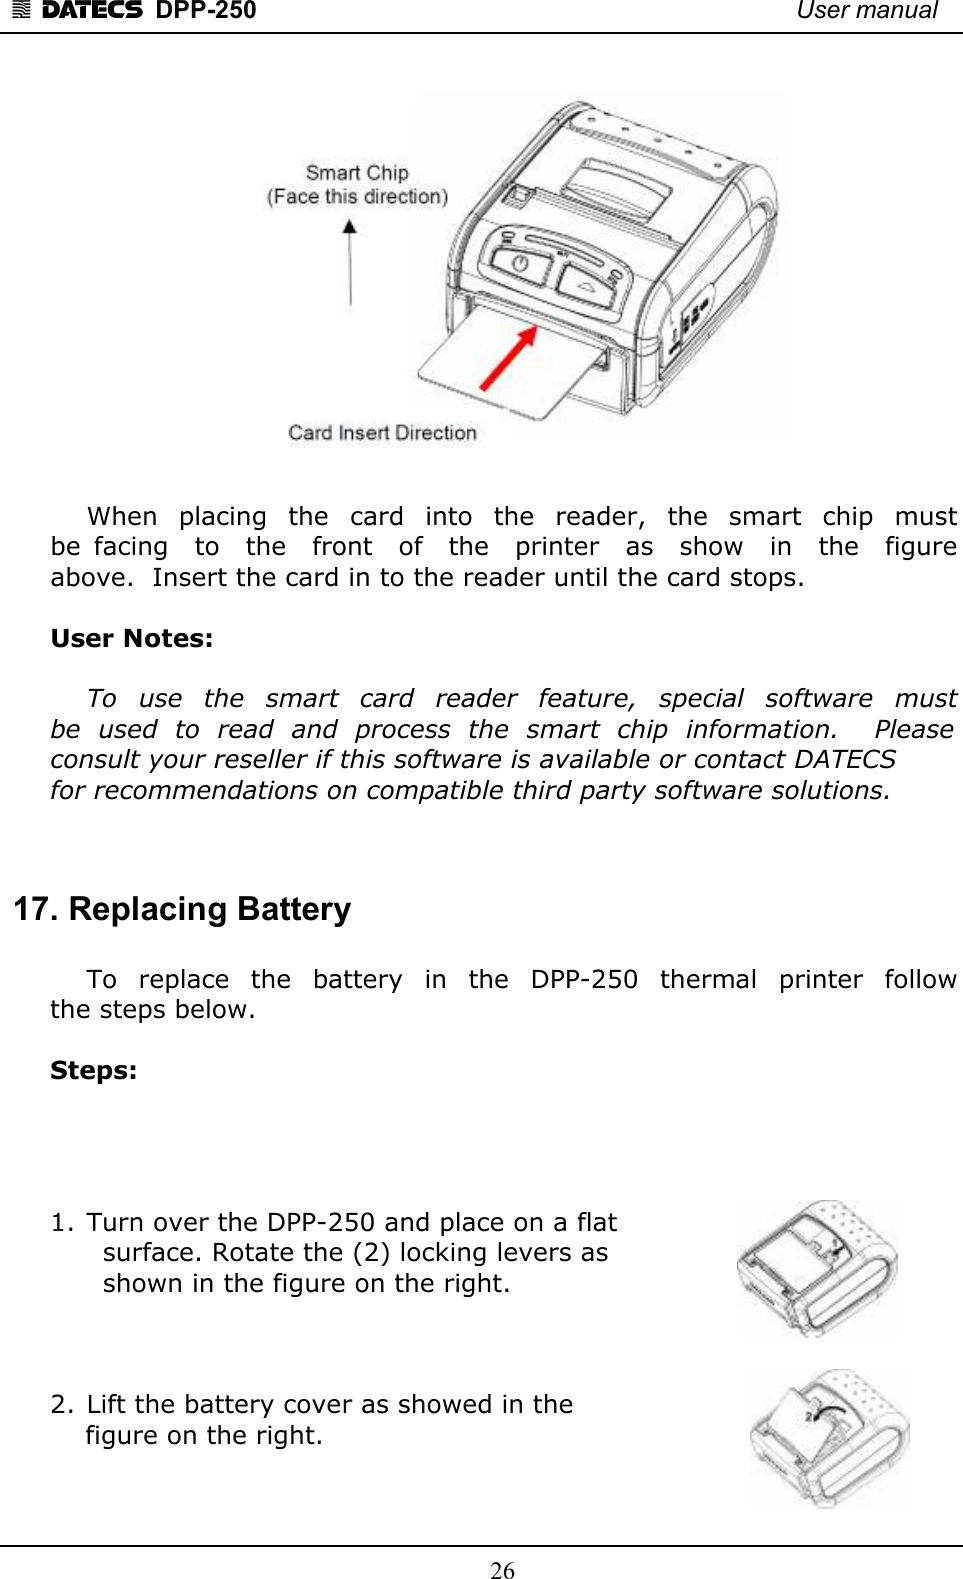 1 DATECS  DPP-250    User manual     26     When  placing  the  card  into  the  reader,  the  smart  chip  must  be  facing    to    the    front    of    the    printer    as    show    in    the    figure  above.  Insert the card in to the reader until the card stops.   User Notes:    To  use  the  smart  card  reader  feature,  special  software  must  be  used  to  read  and  process  the  smart  chip  information.    Please  consult your reseller if this software is available or contact DATECS  for recommendations on compatible third party software solutions.    17. Replacing Battery    To  replace  the  battery  in  the  DPP-250  thermal  printer  follow  the steps below.  Steps:     1. Turn over the DPP-250 and place on a flat        surface. Rotate the (2) locking levers as        shown in the figure on the right.     2. Lift the battery cover as showed in the      figure on the right.    